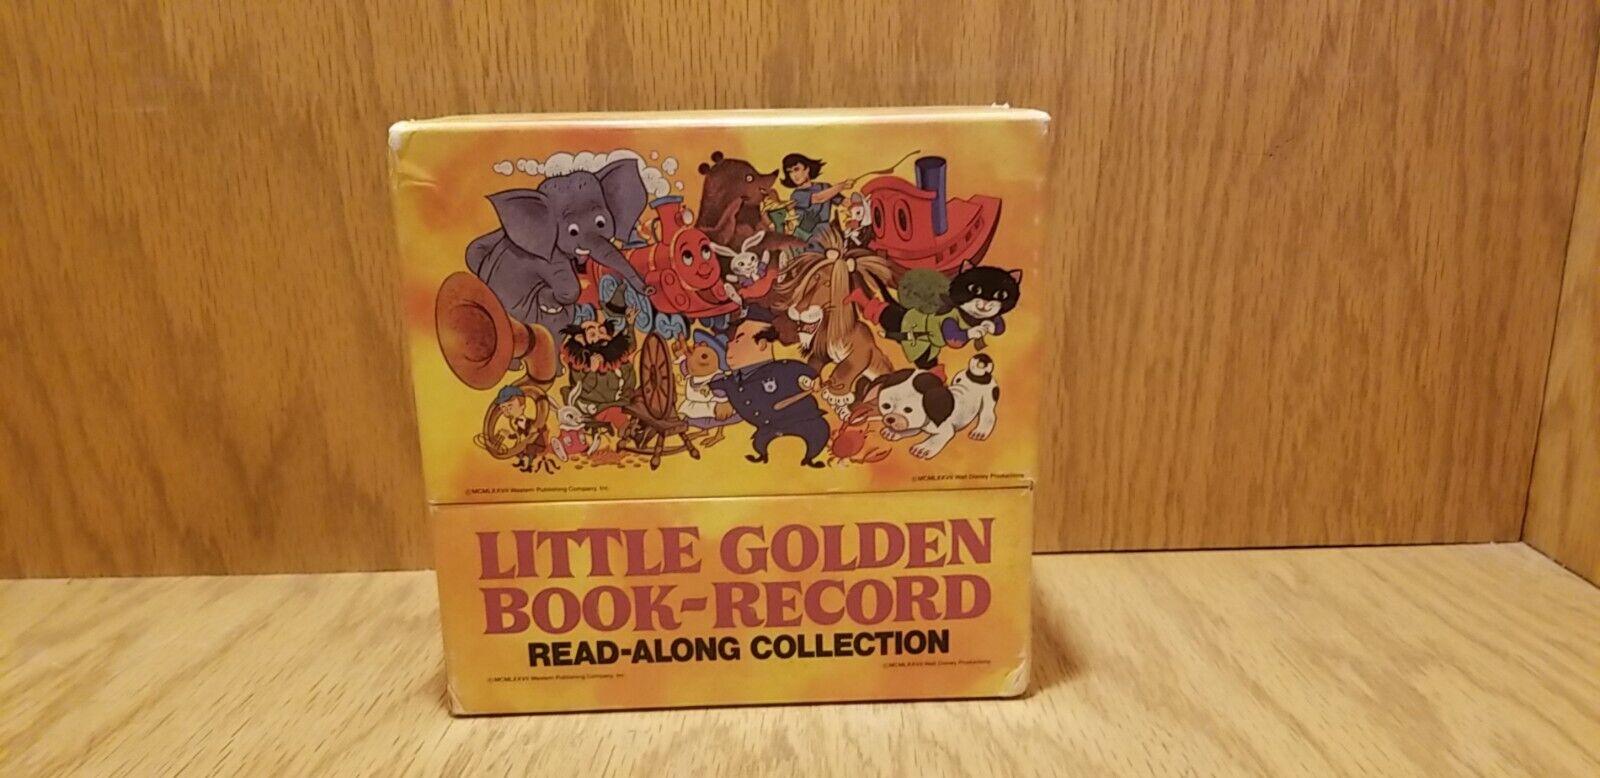 Vintage 1976 Collection of 20 Disneyland Little Golden Book-Record Read-Along